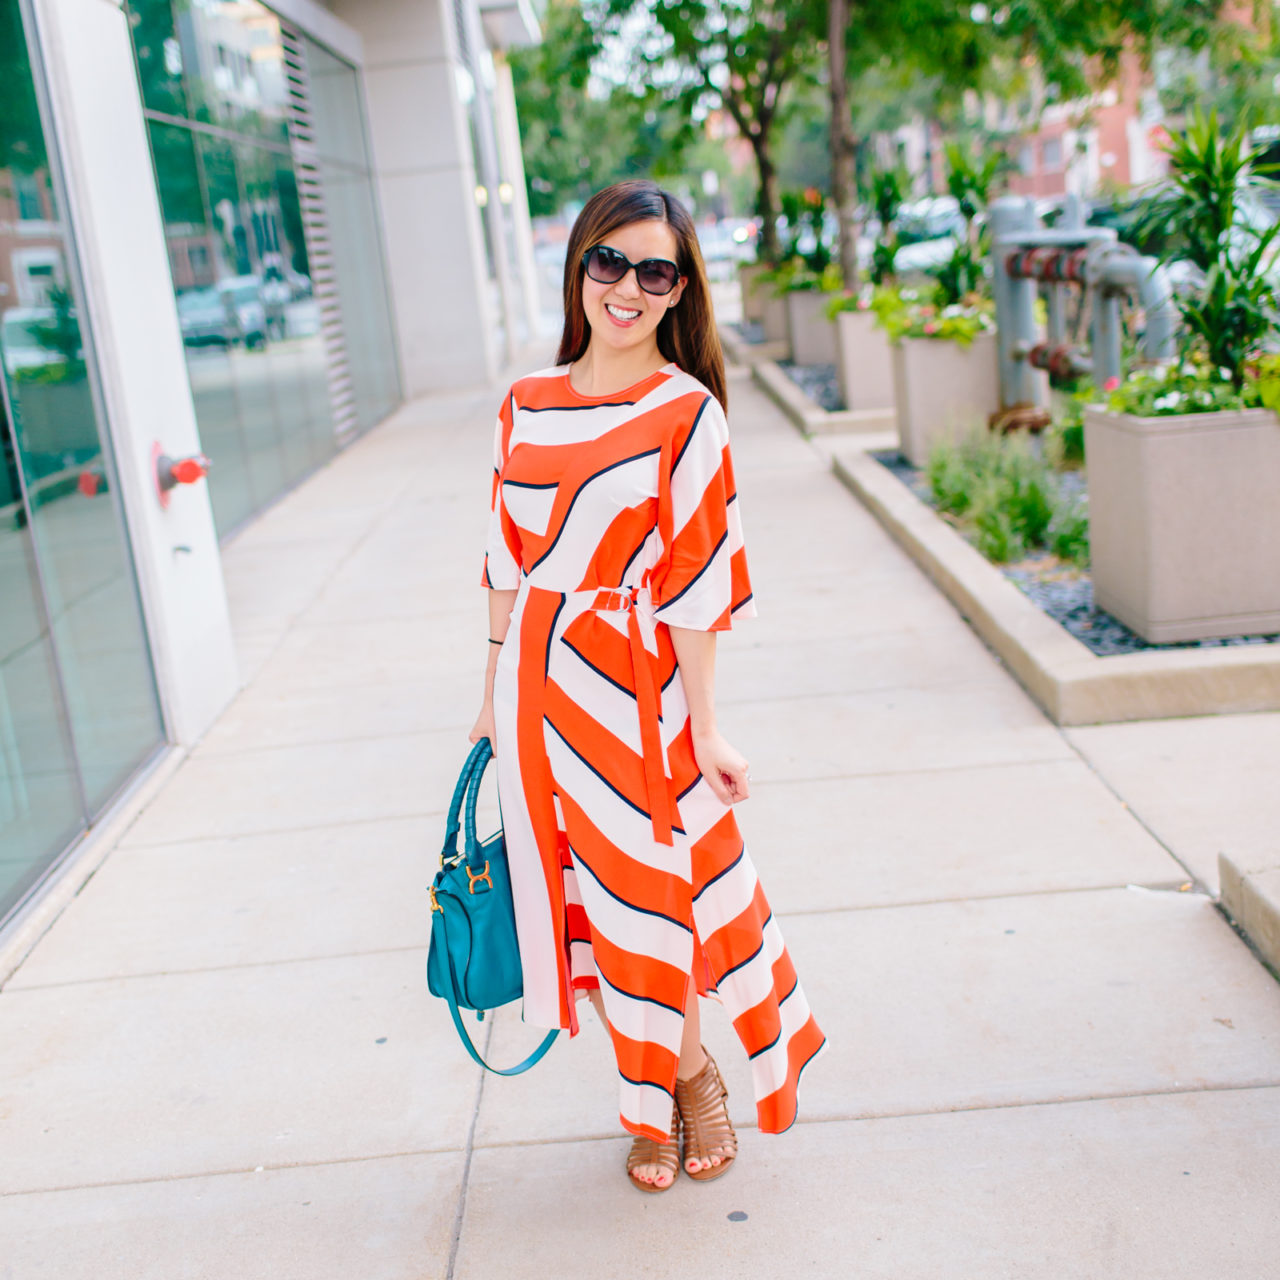 A Summer Style Tip for Short or Petite Women